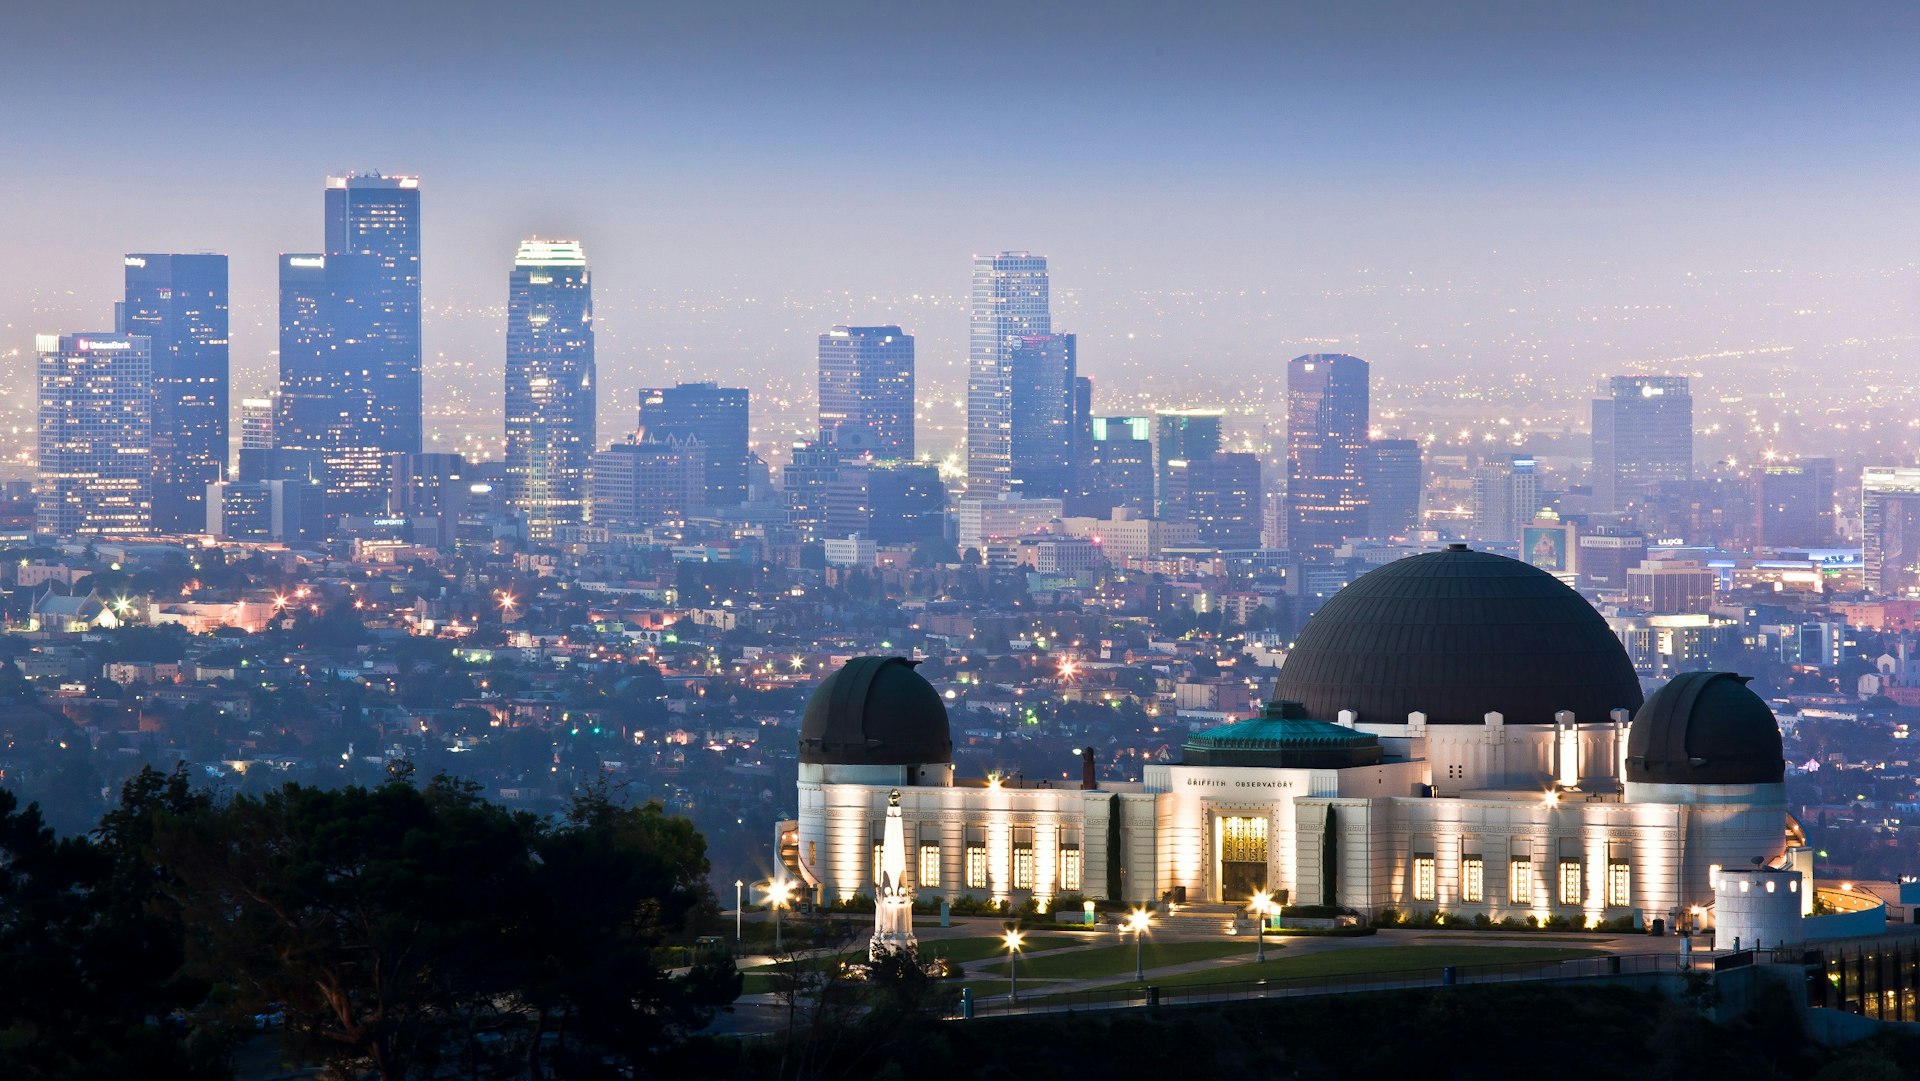 Shot from a distance, the art deco Griffith Observatory stands on the crest of a hill with the sparkling city skyline at dusk as its backdrop.